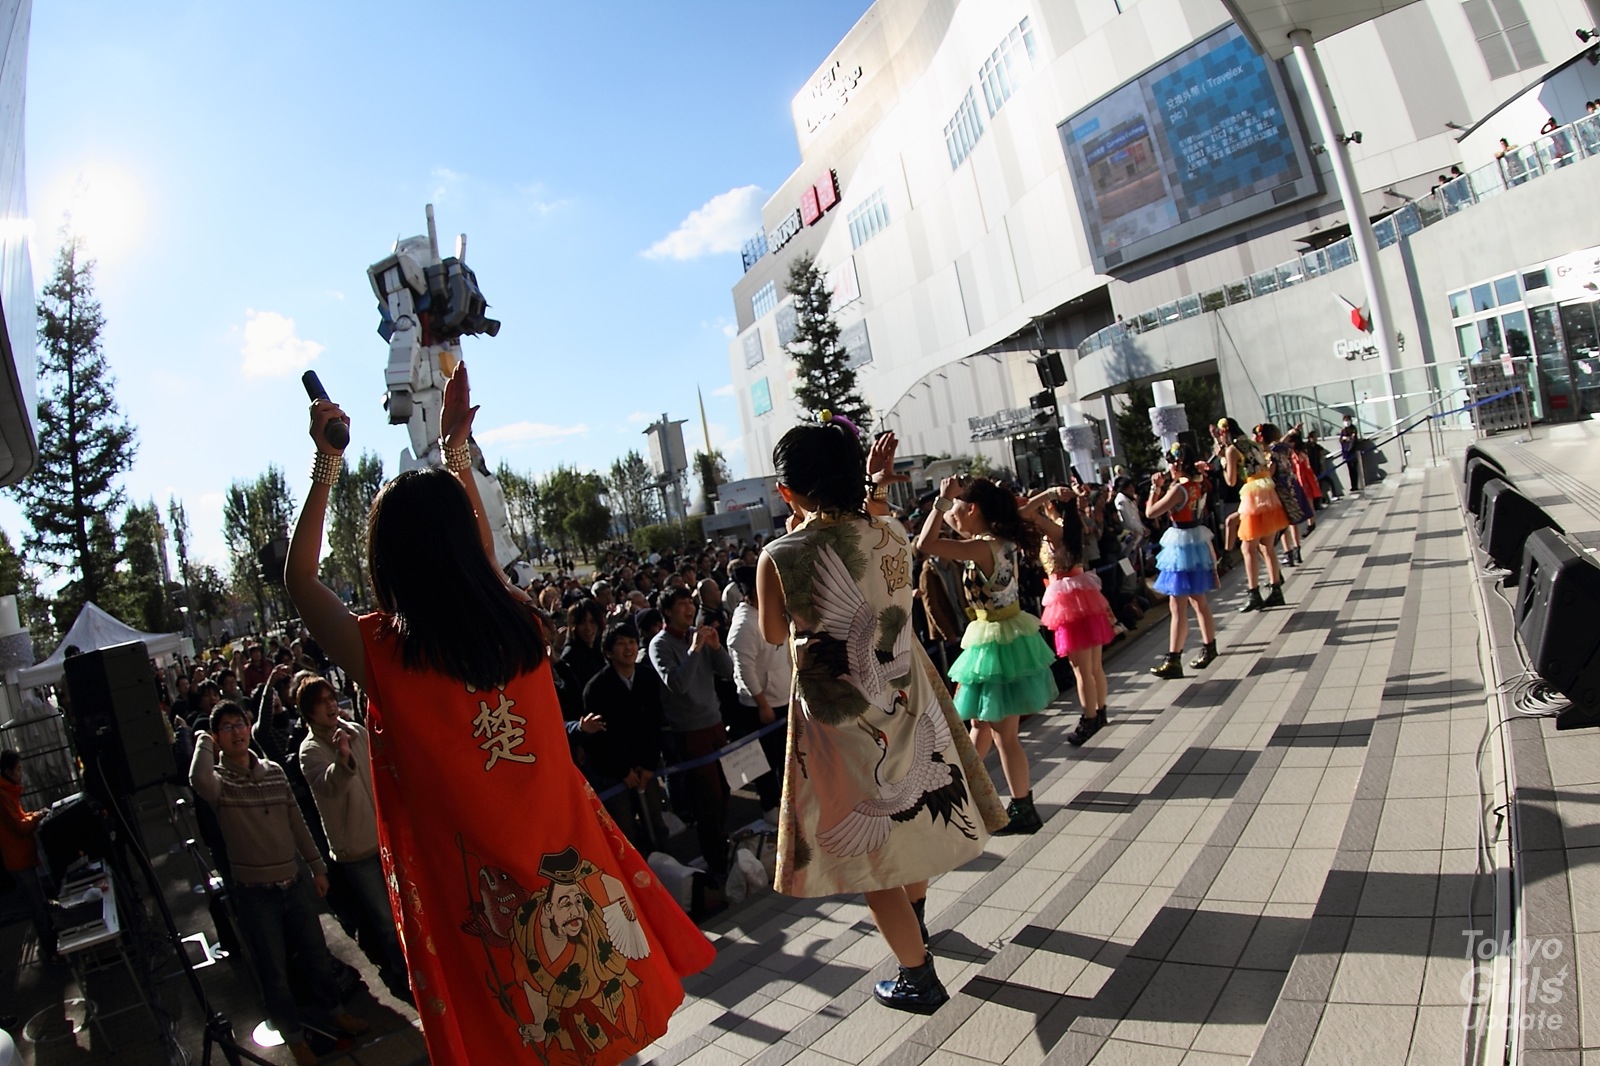 Cheeky Parade’s Odaiba Scouting Expedition in Preparation for Their “Triumphant Return From NY Party” on December 14th